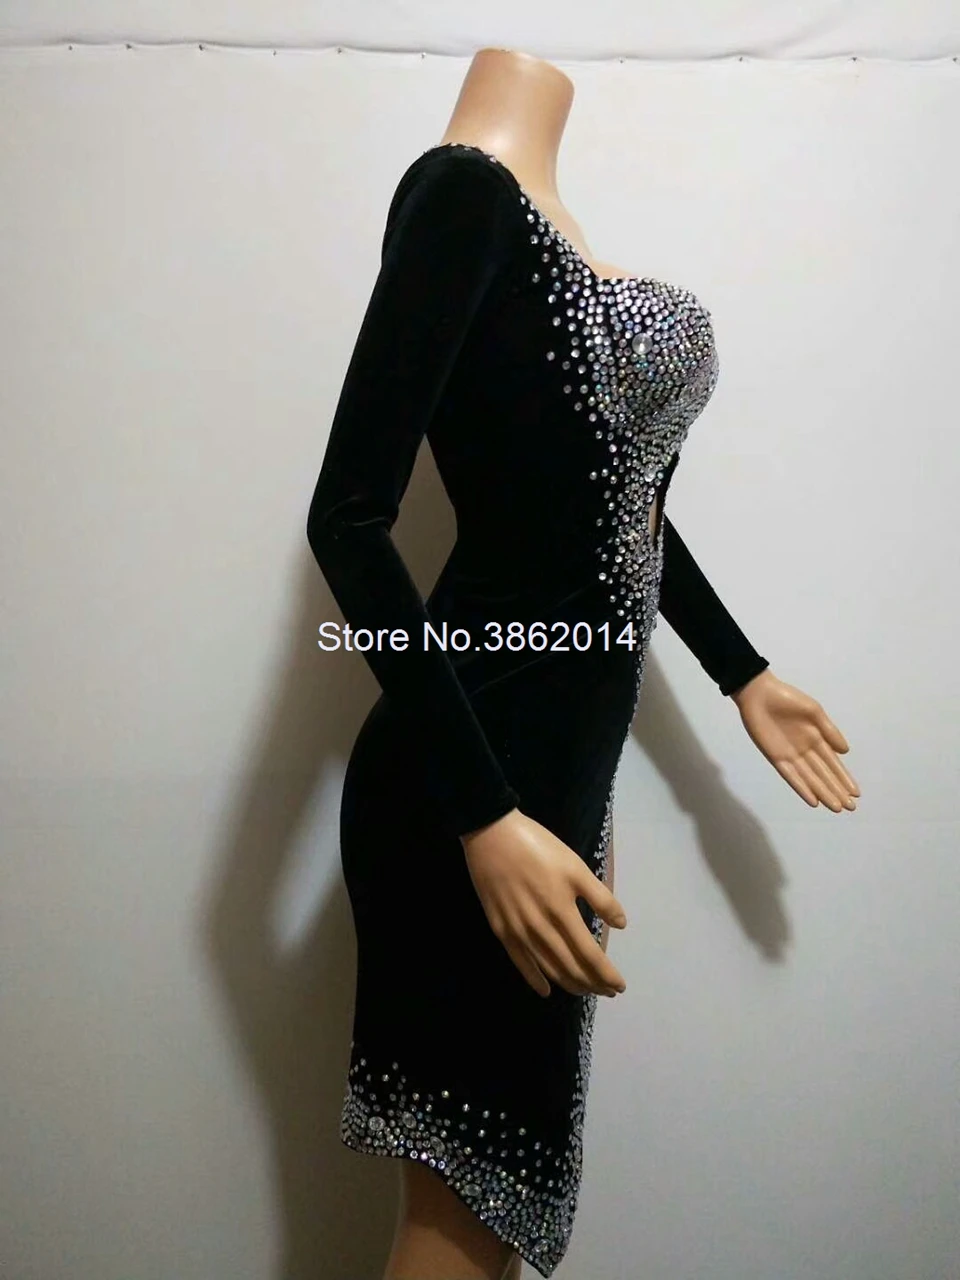 Sexy Rhinestones Latin Dance Dress Black Female Singer Stage Wear Show Performance Outfit Women Birthday Prom Party Dresses